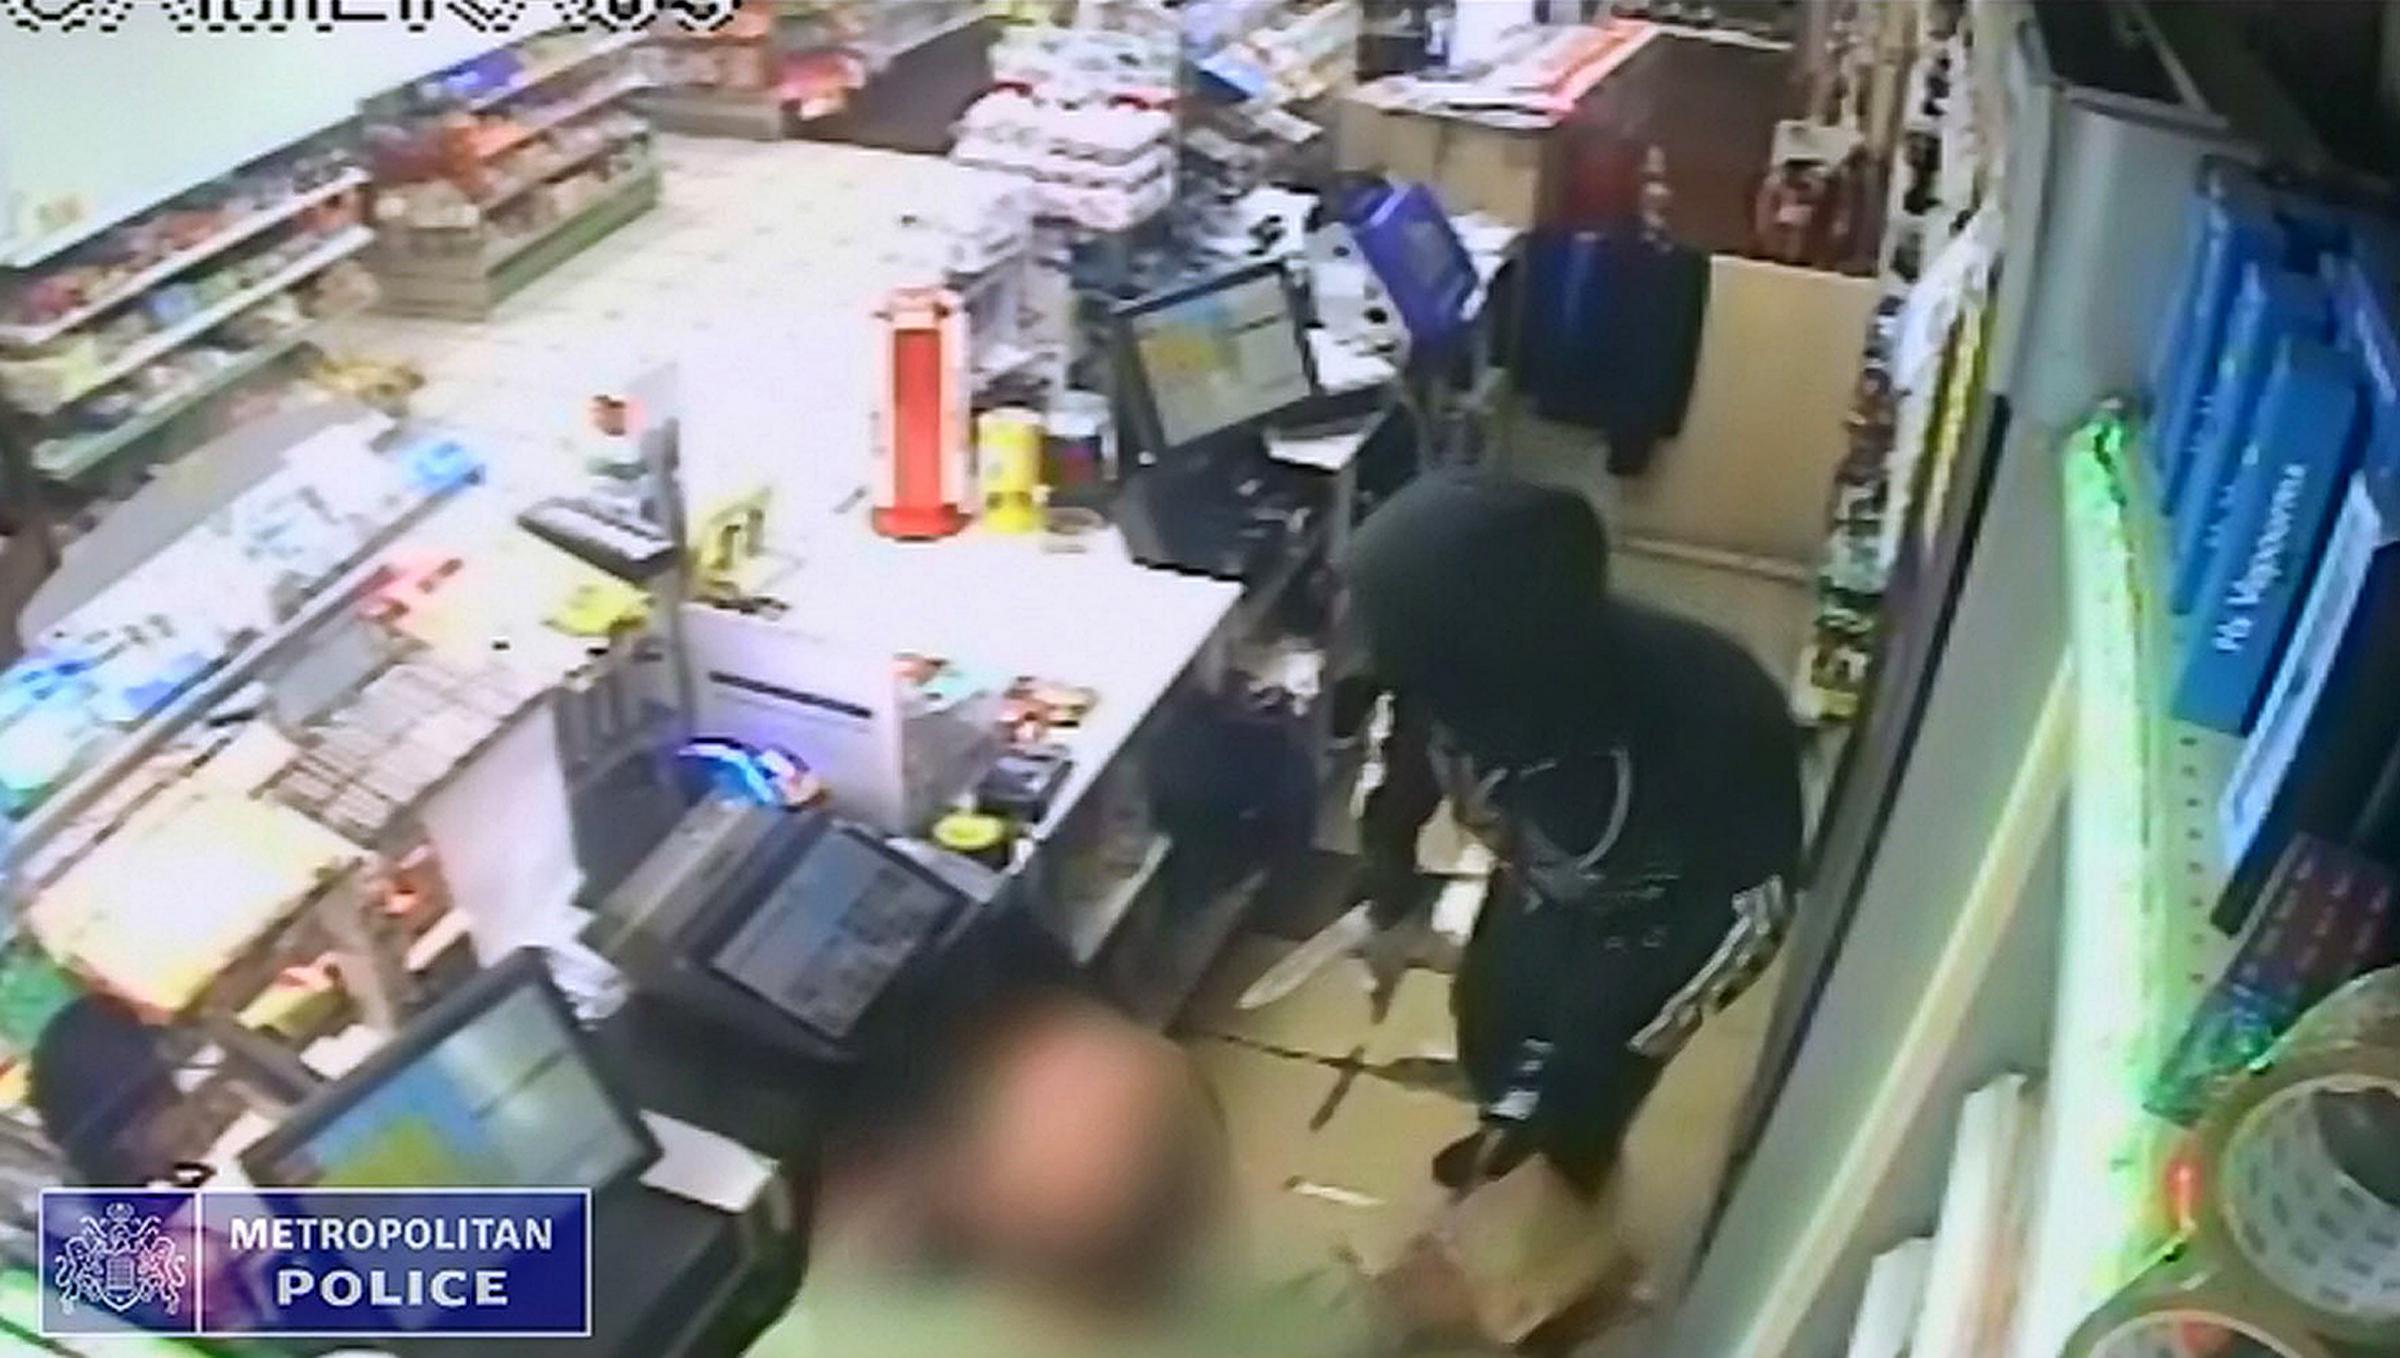 VIDEO: Hooded figure steals hundreds of pounds in Lewisham knifepoint robbery - News Shopper